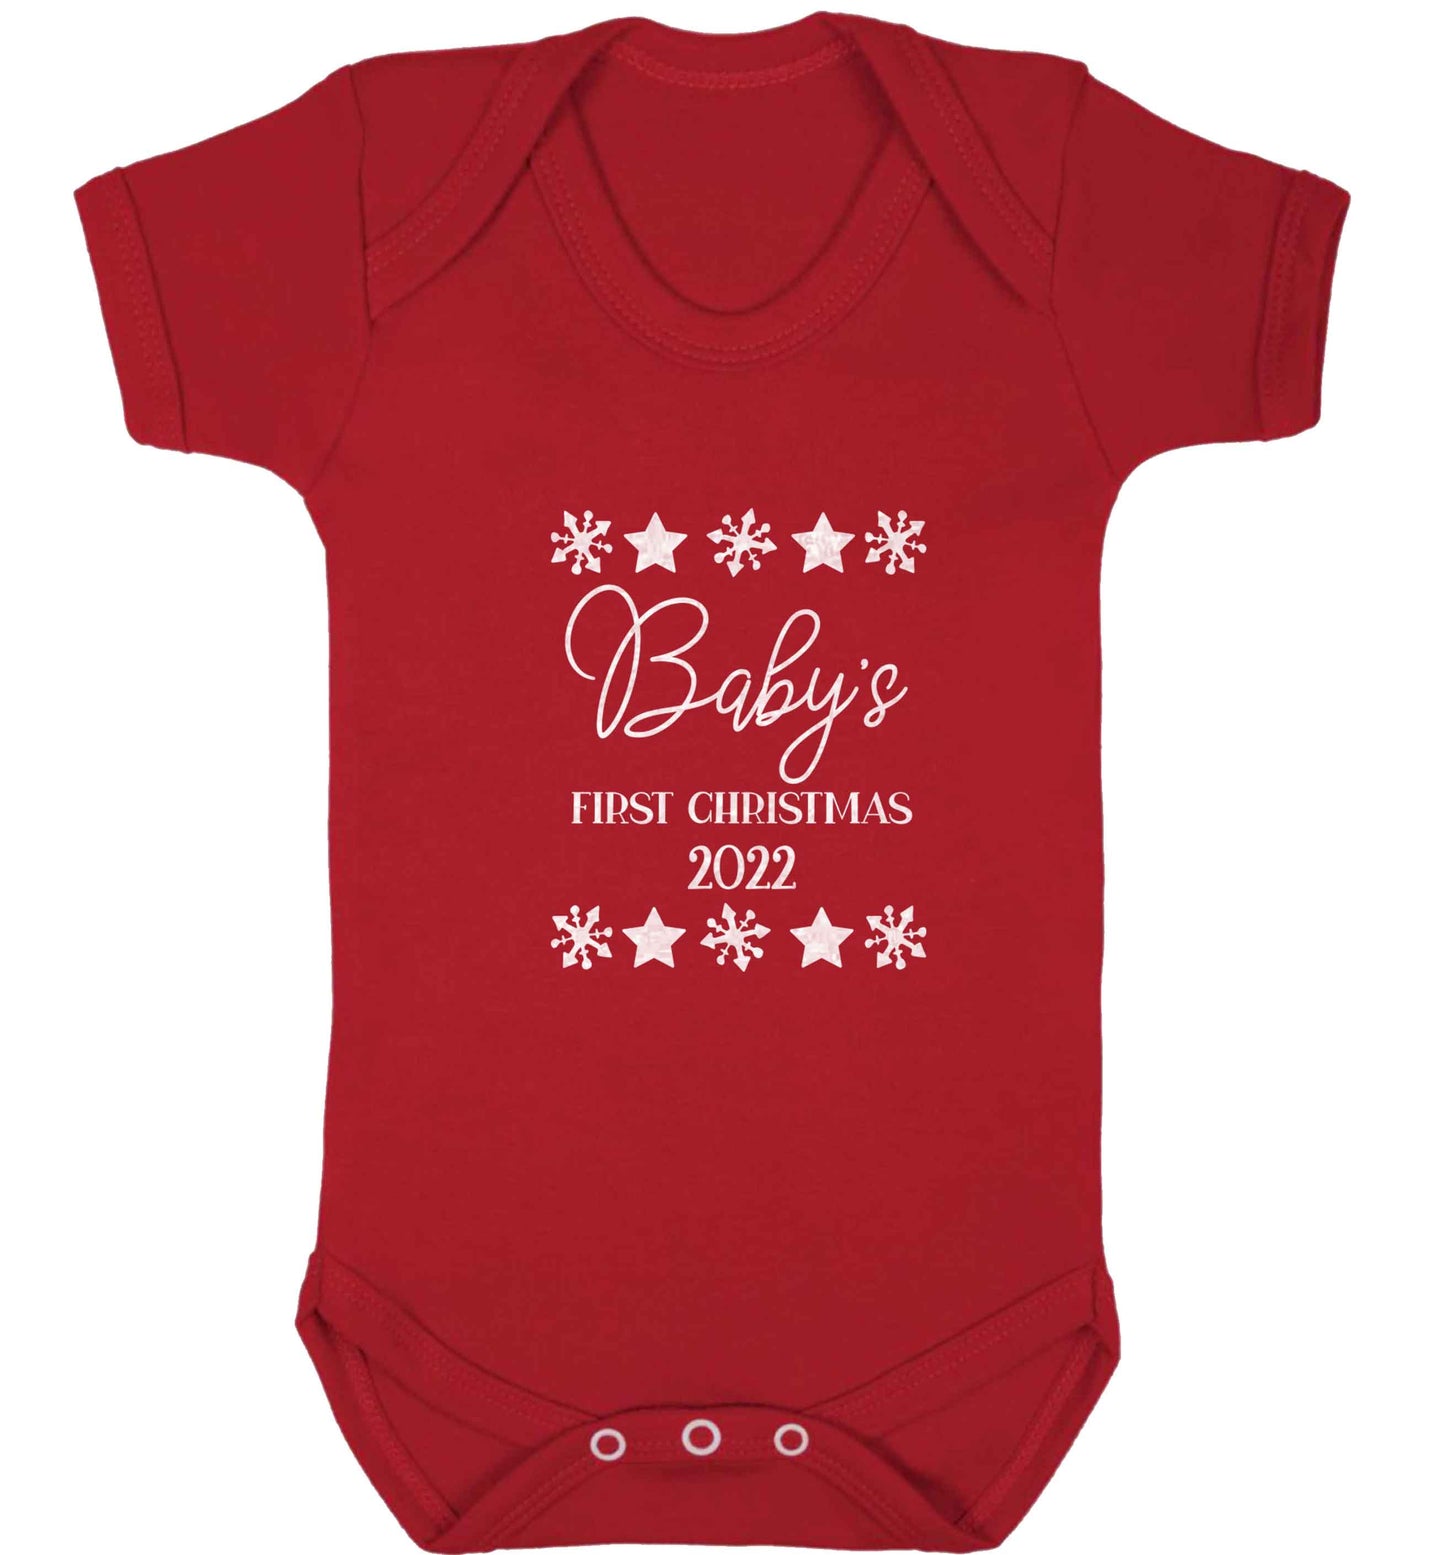 Baby's first Christmas baby vest red 18-24 months